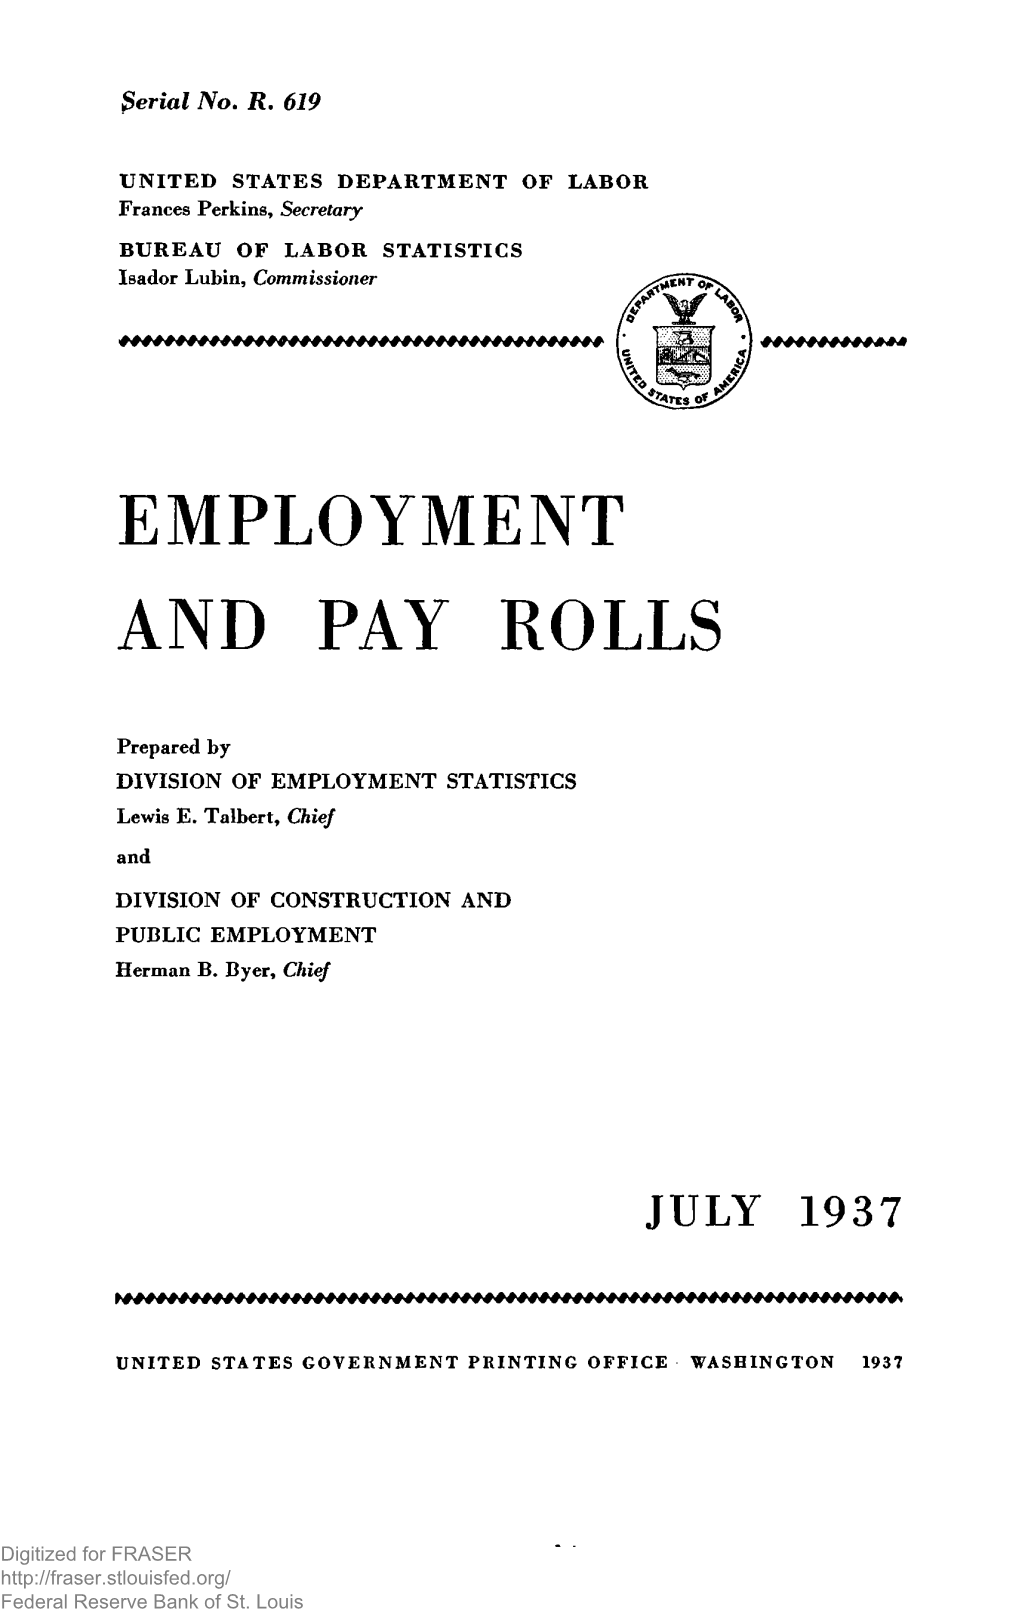 Employment and Pay Rolls July 1937